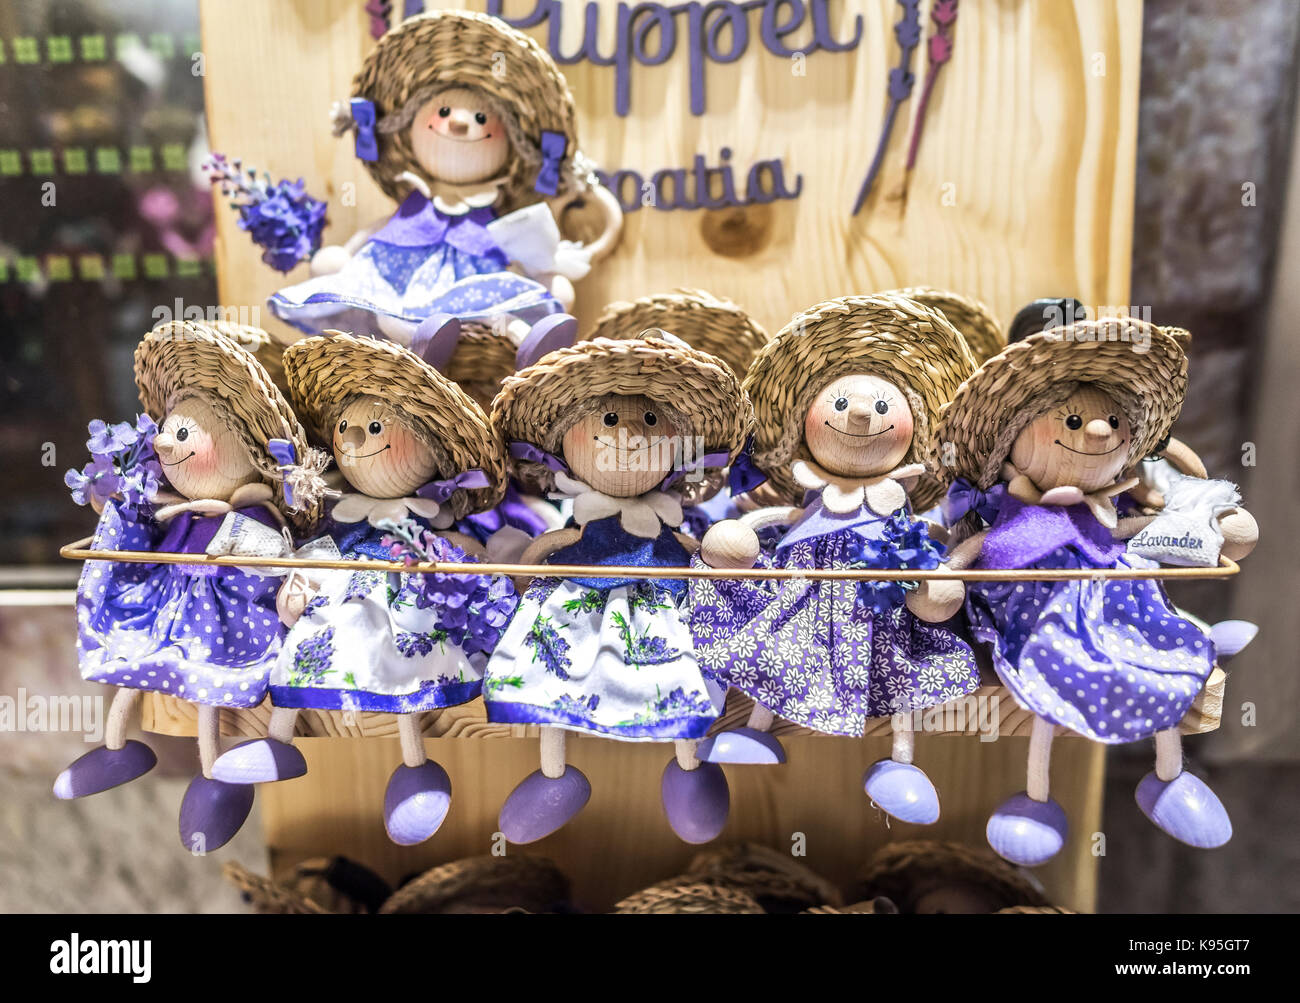 Wooden dolls dressed in purple outfits. Stock Photo